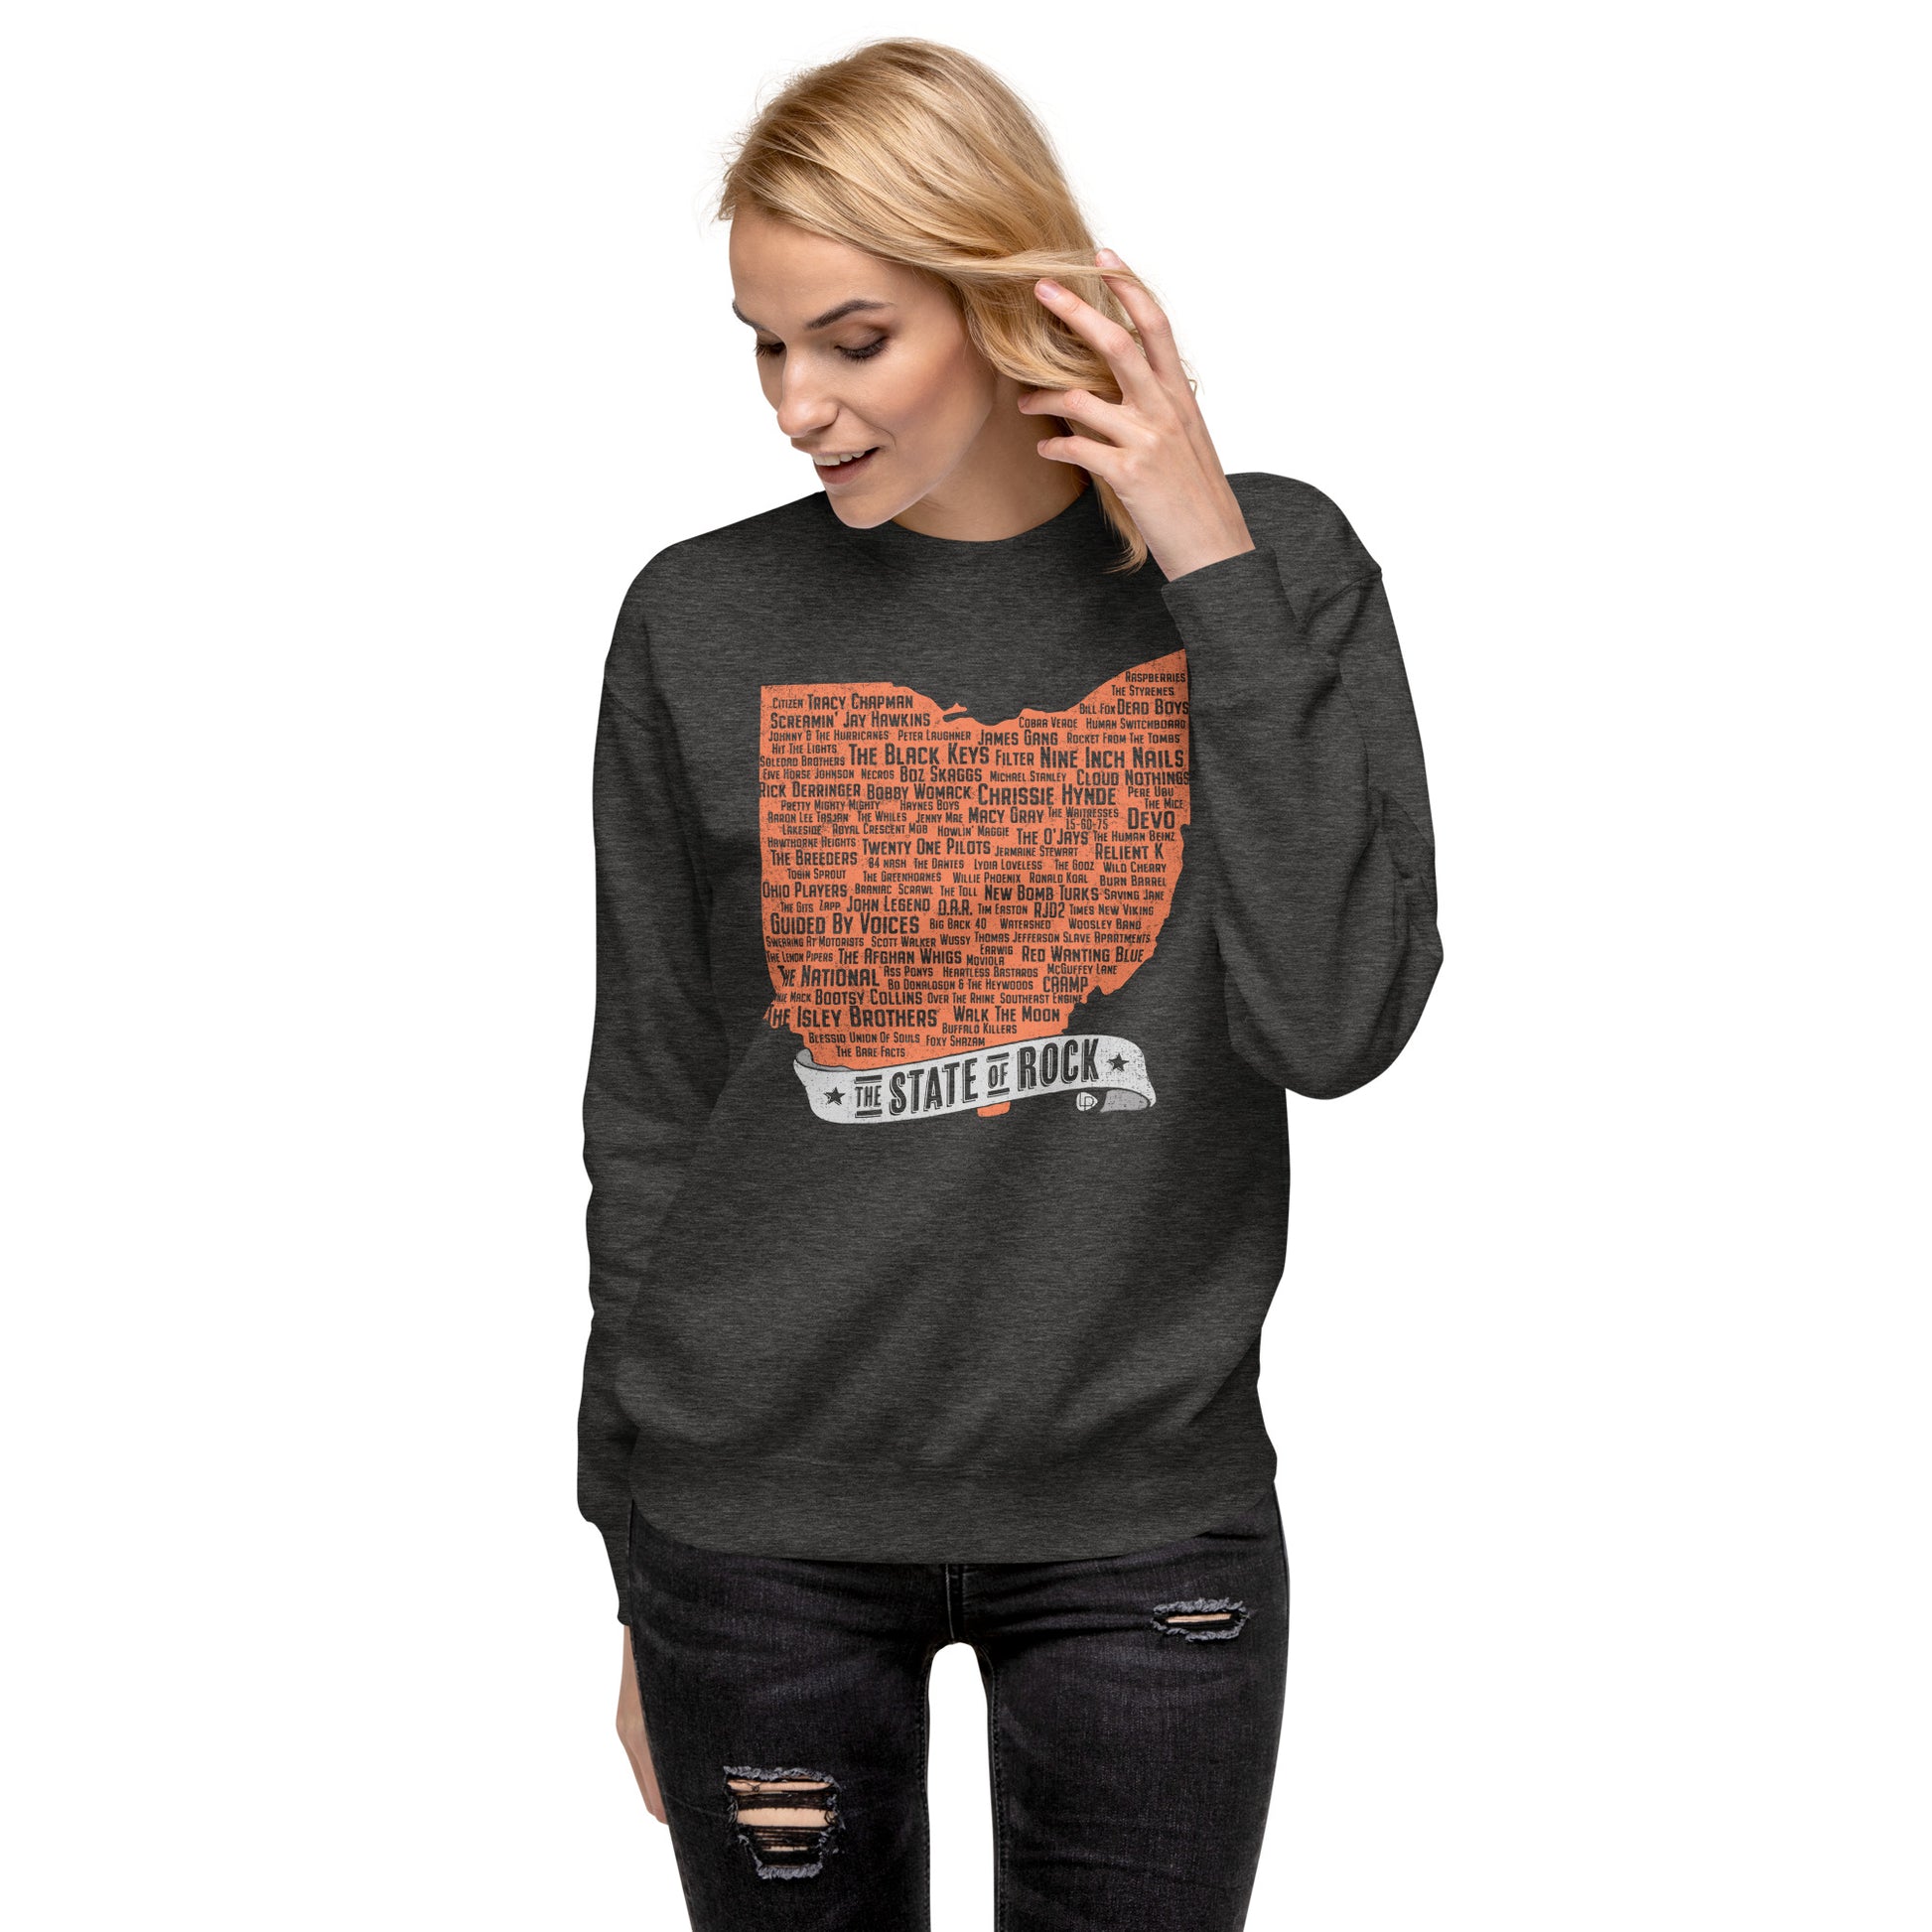 The State of Rock Tailgate Sweatshirt - Lost Radicals